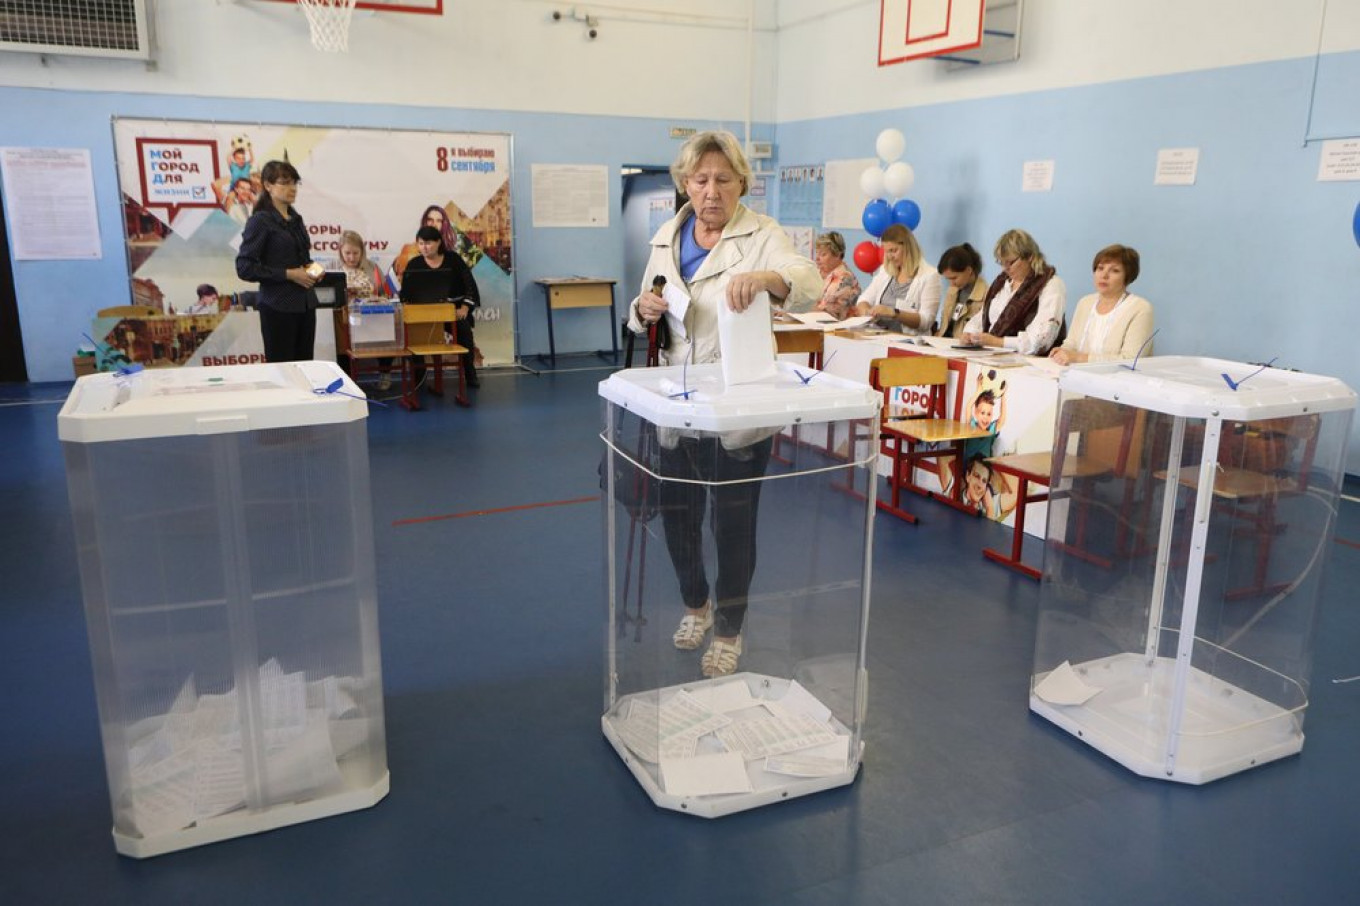 Russia’s Ruling Party Sees Voter Support Drop in Crimea 5 Years After Annexation